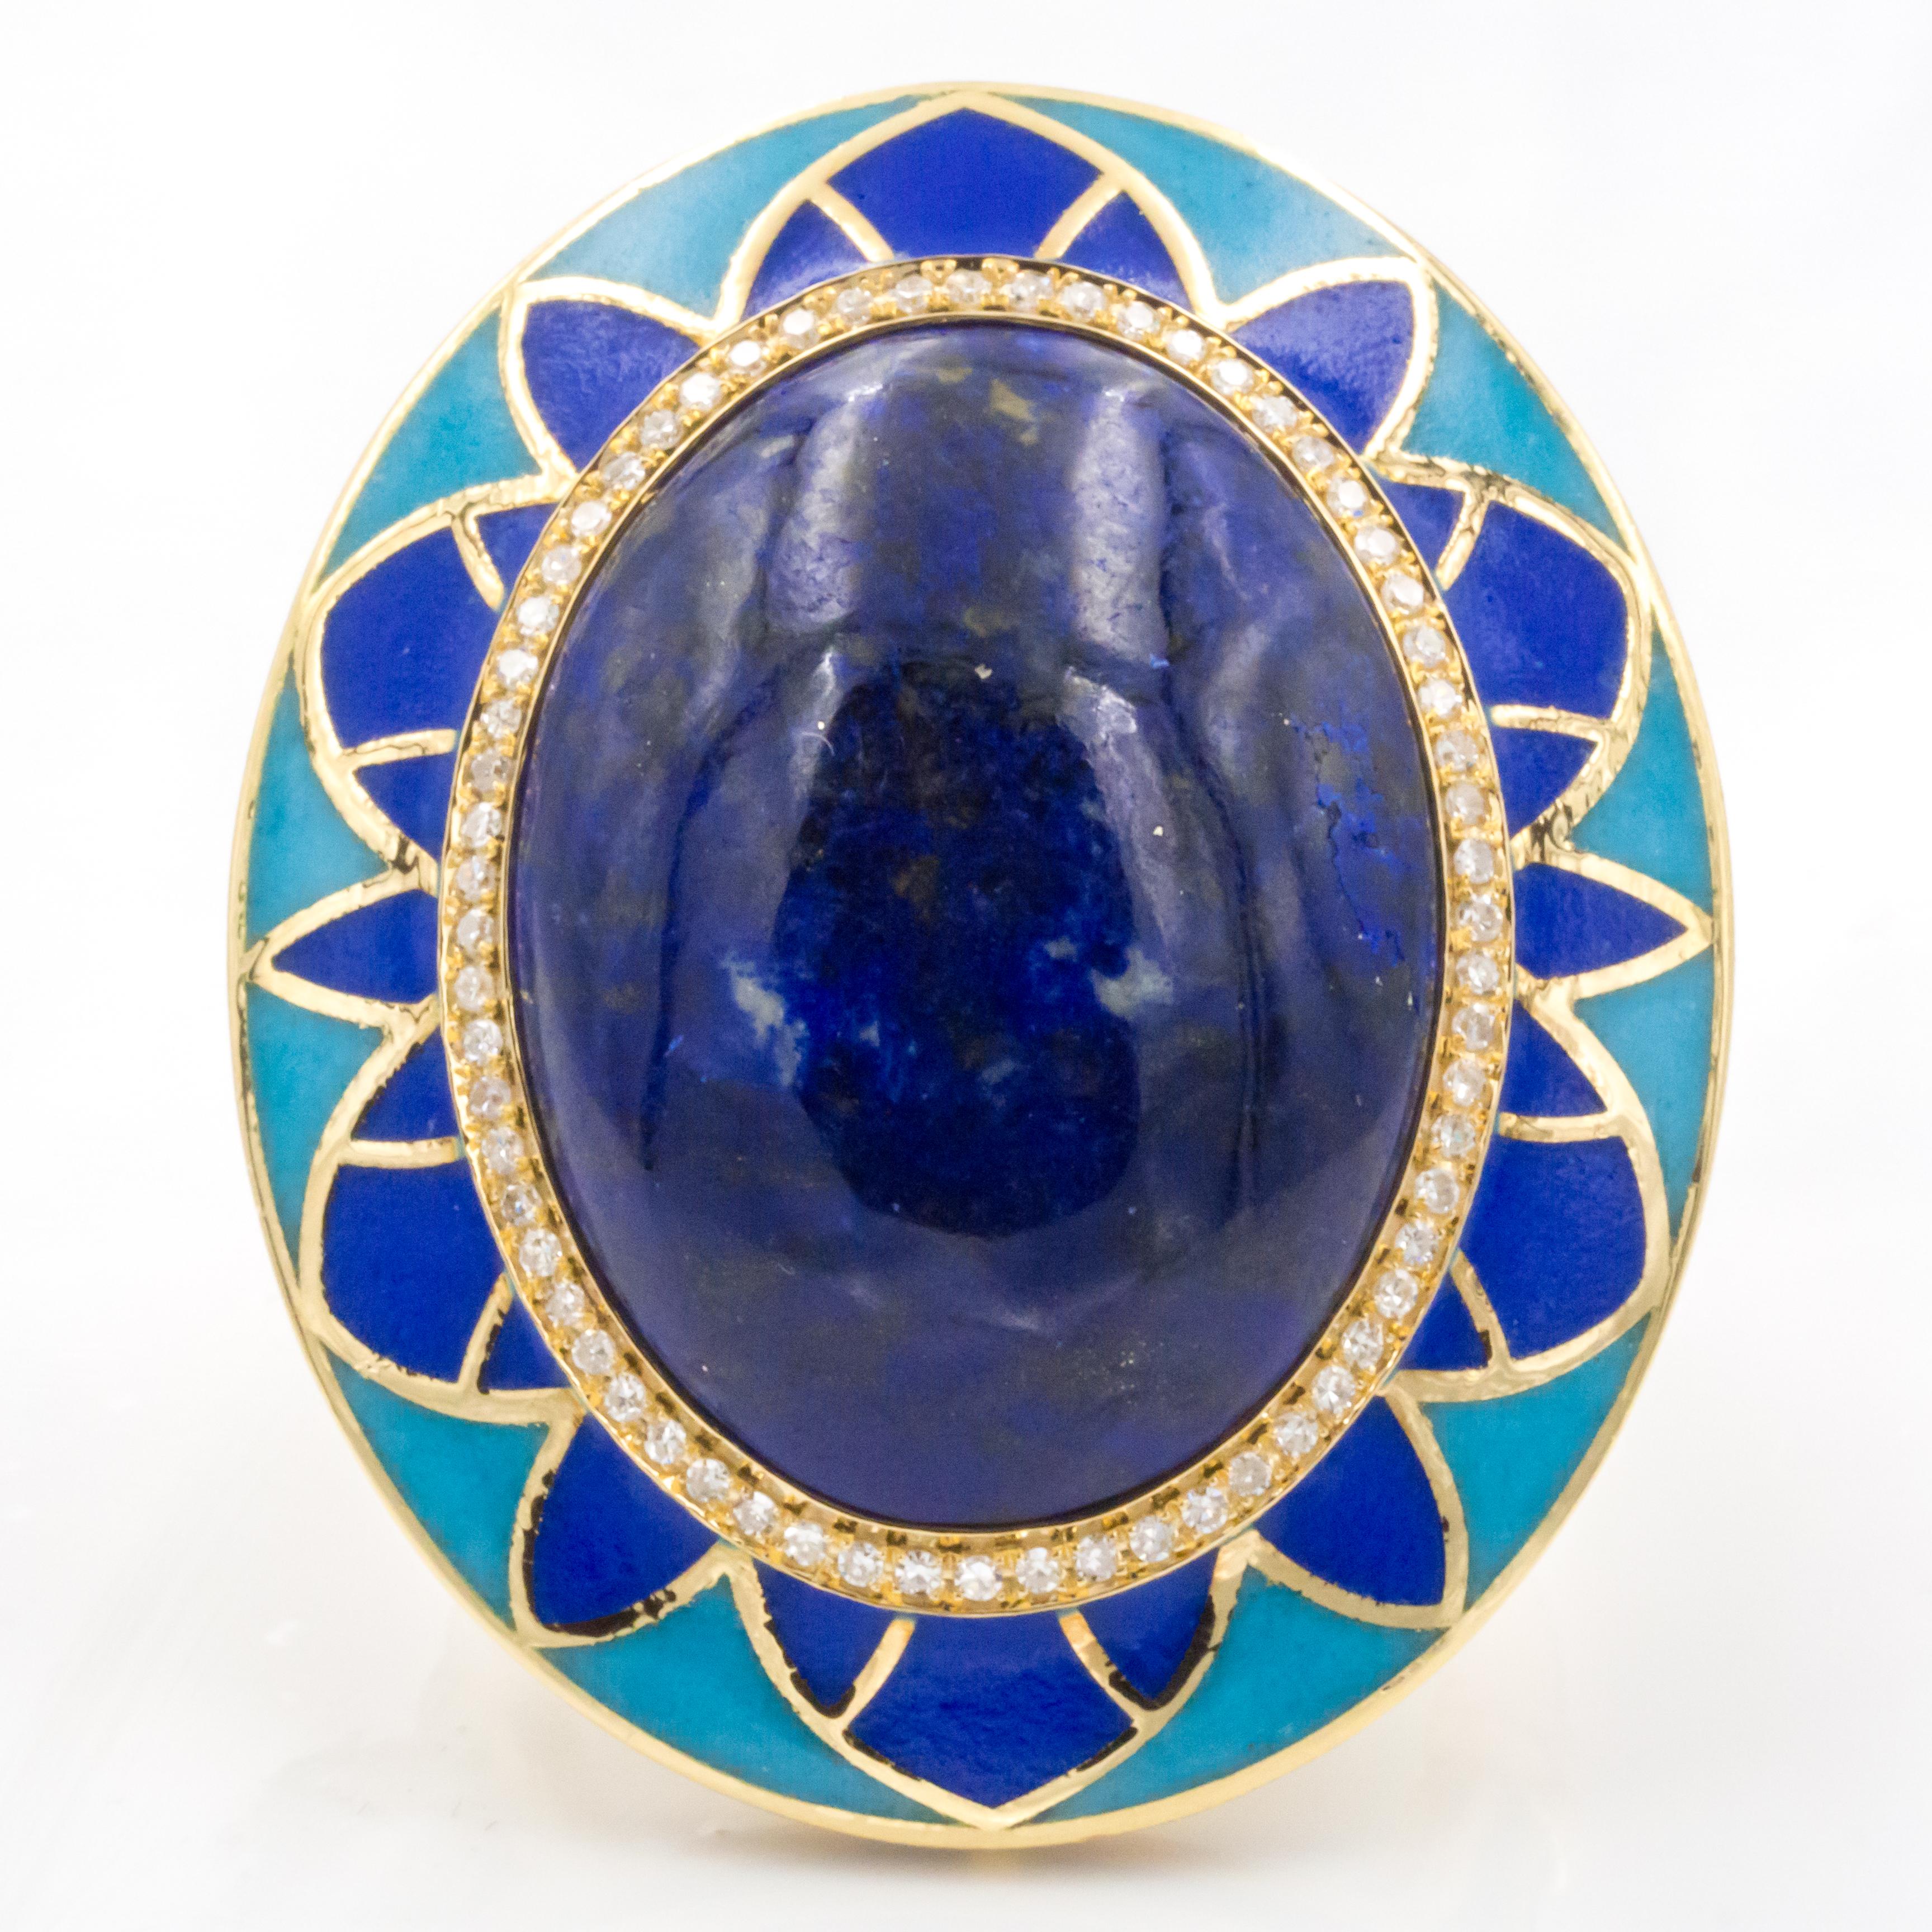 This Egyptian-Revival 18k gold cocktail ring features a cabochon lapis lazuli center, with a melee diamond halo. Beautiful enamel work compliment the colors of the center stone.

Lapis Lazuli: 18.21 ct
Diamonds: 0.65 ct
Metal: 18k Yellow Gold
Ring